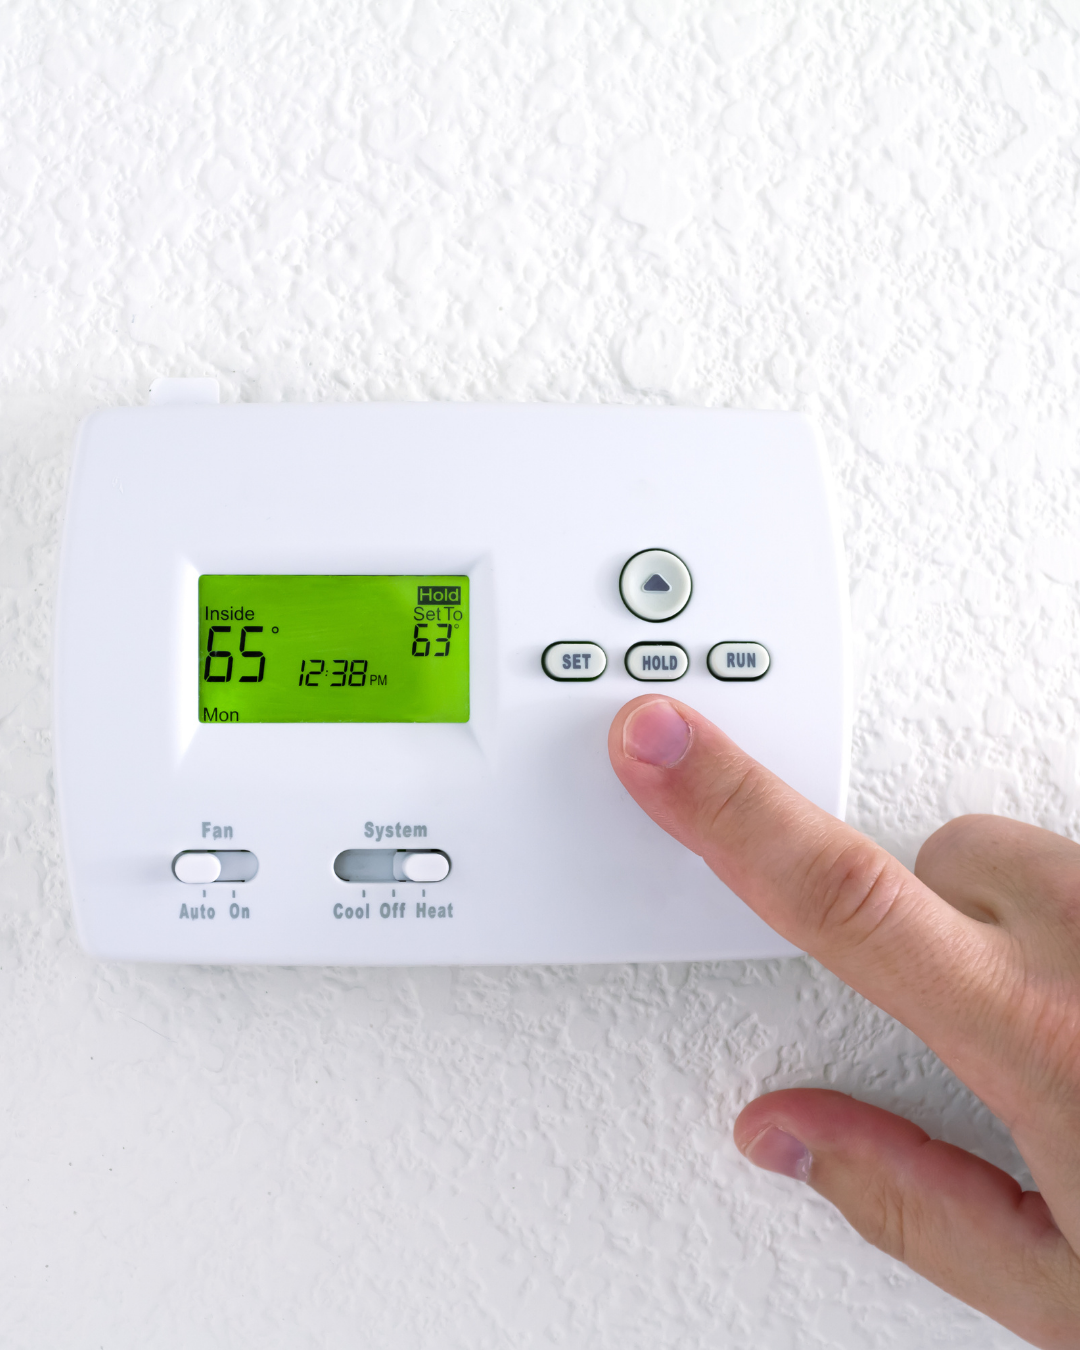 In Need of Help with Thermostat Troubleshooting?